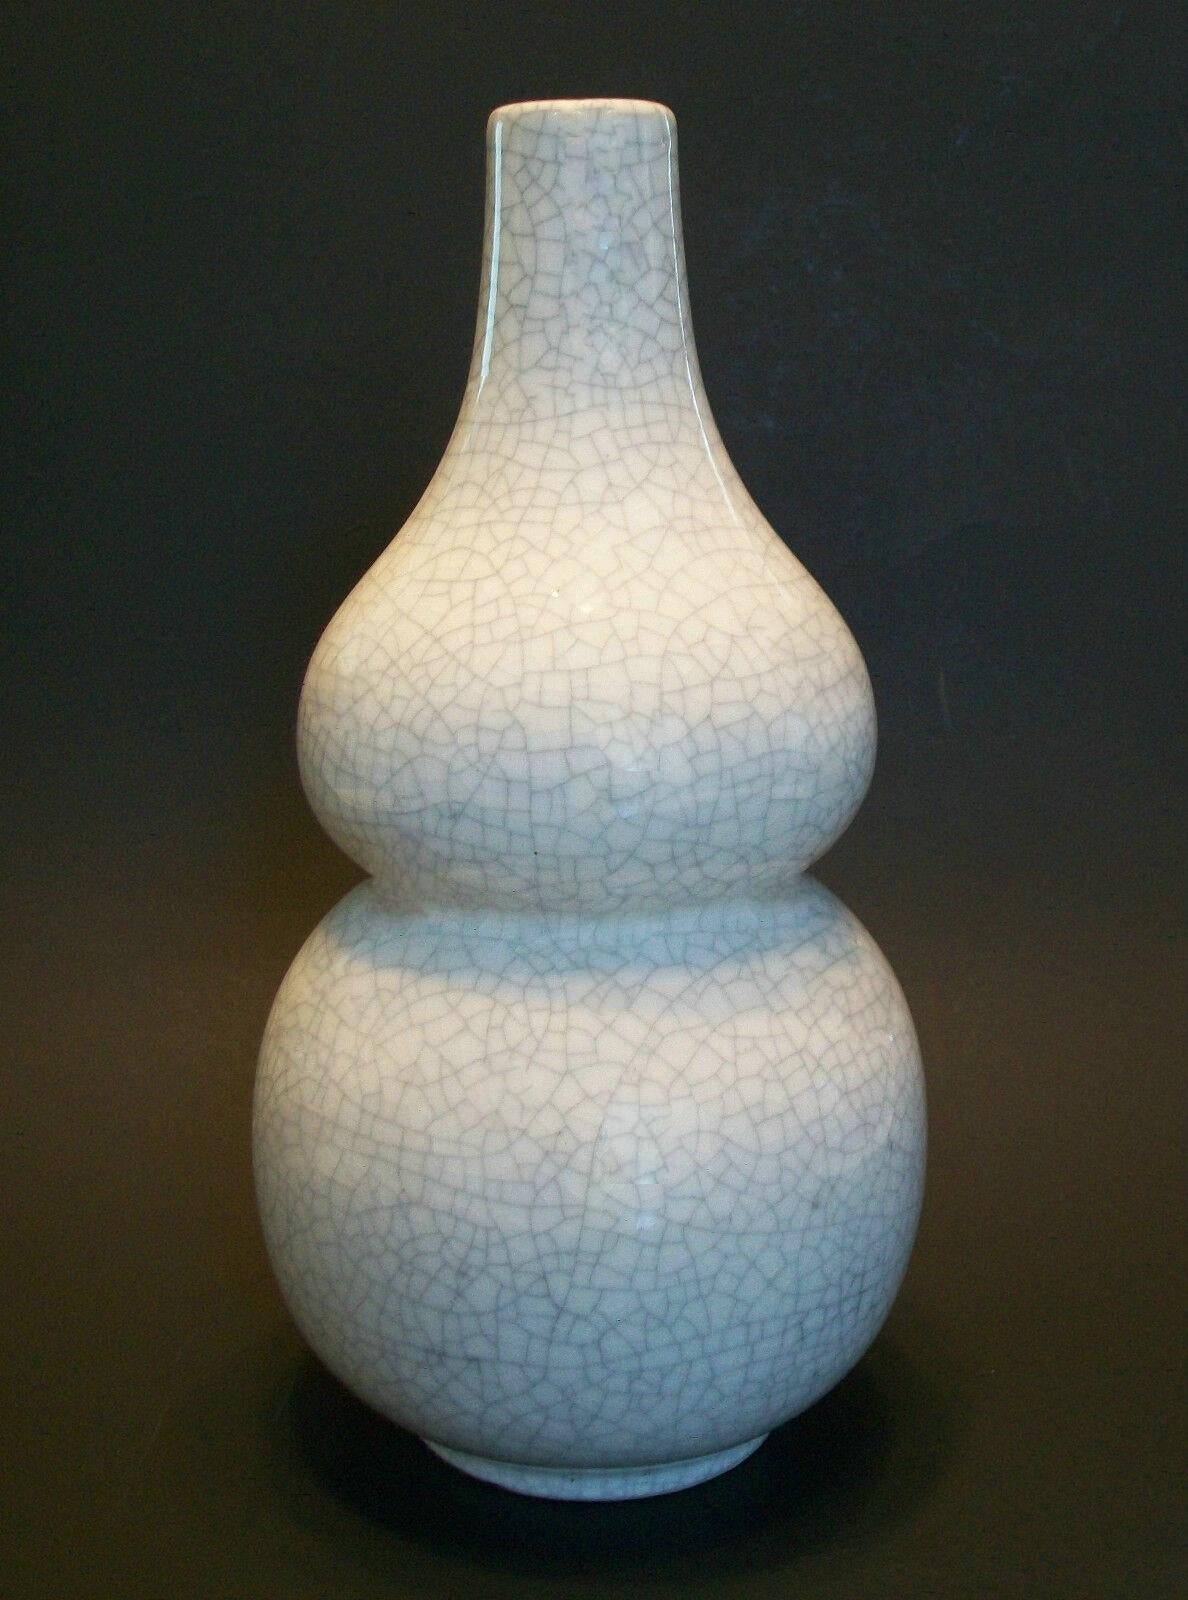 Ming style double gourd ceramic vase with crackle glaze - signed - country of origin unknown - mid 20th century.

Excellent vintage condition - no loss - no damage - no restoration - minor signs of age and use.

Size - 4 1/2